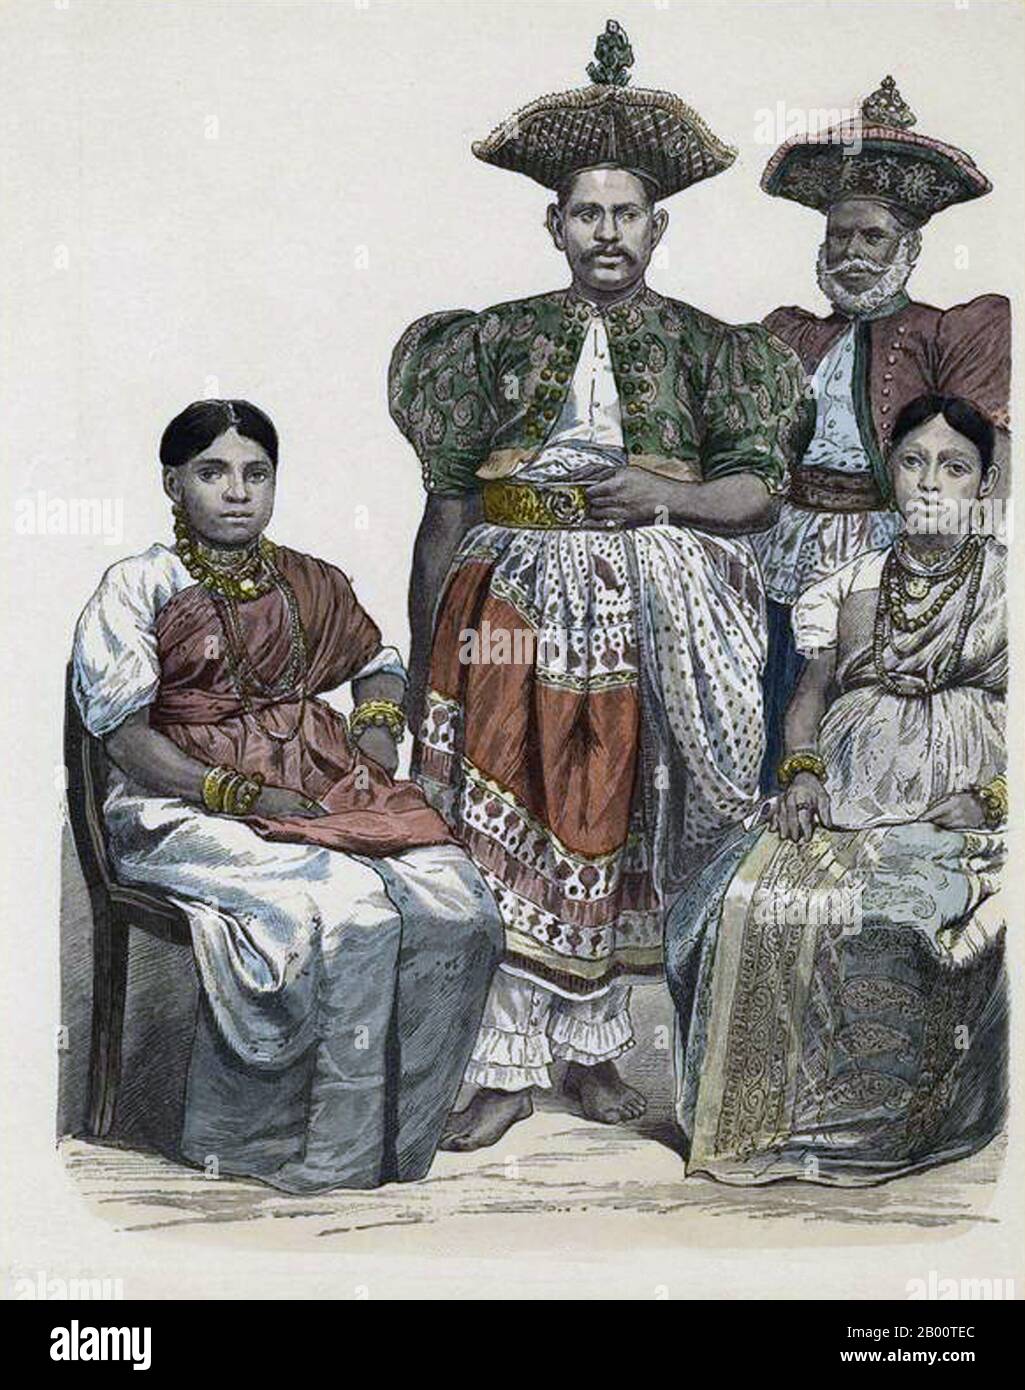 Sri Lanka: Wood engraving of Sinhalese chiefs or Radala, Kandy, 1880.  In 1592 Kandy became the capital city of the last remaining independent kingdom in Sri Lanka after the coastal regions had been conquered by the Portuguese. Kandy stayed independent until the early 19th century. In the Second Kandyan War, the British met no resistance and reached the city on February 10, 1815. On March 2, 1815, a treaty known as the Kandyan Convention was signed between the British and the Radalas (Kandyan aristocrats); Kandy recognized the King of England as its King and became a British protectorate. Stock Photo